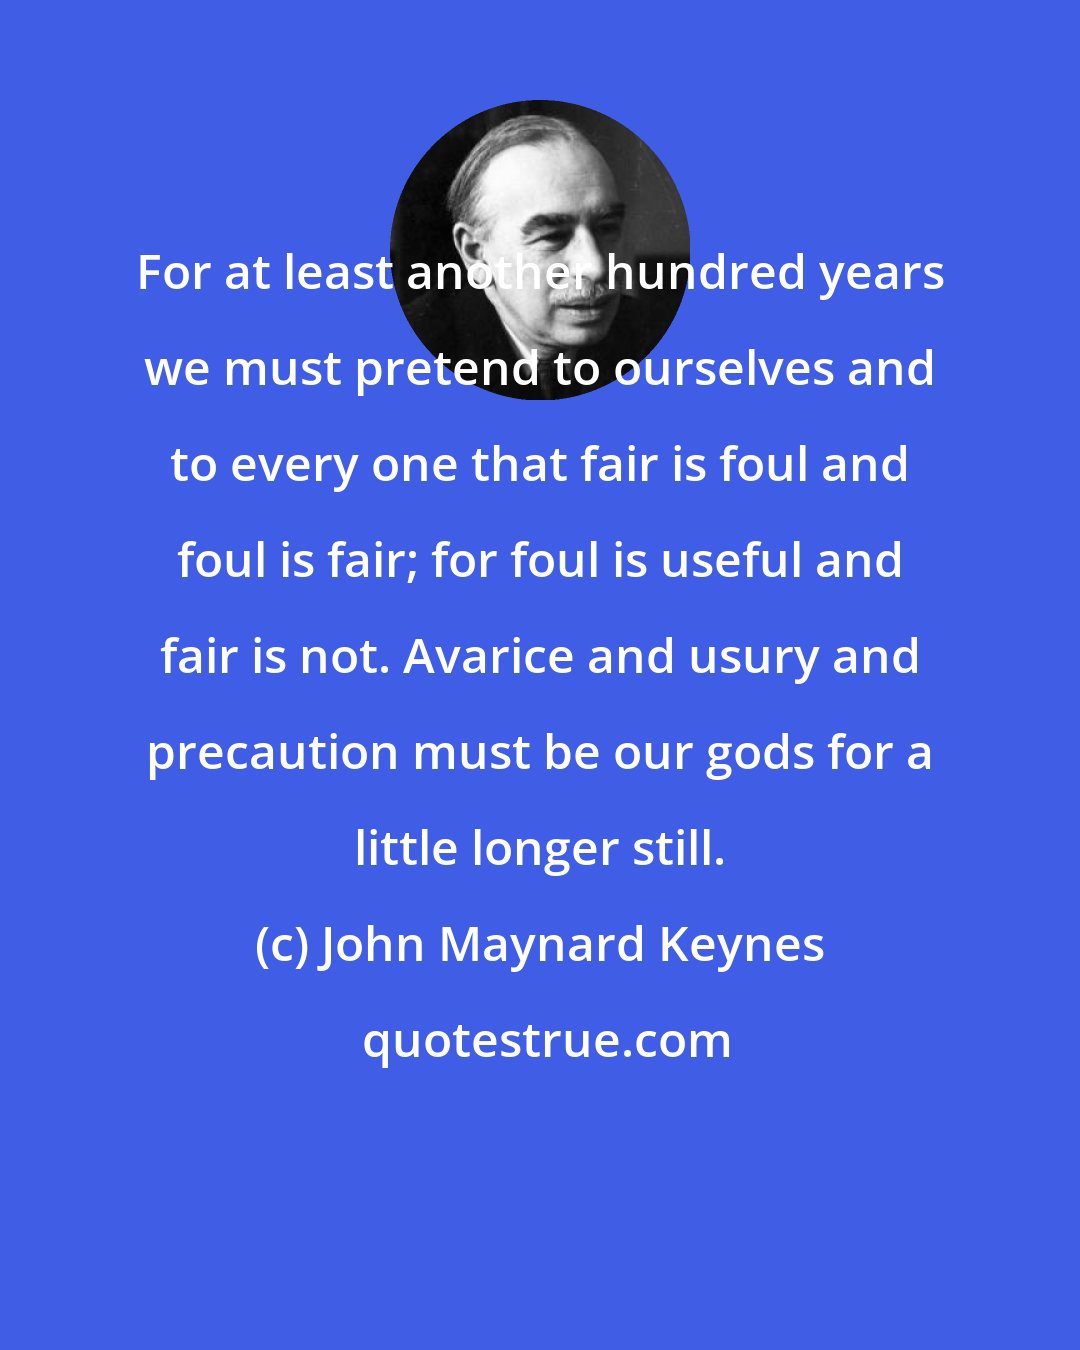 John Maynard Keynes: For at least another hundred years we must pretend to ourselves and to every one that fair is foul and foul is fair; for foul is useful and fair is not. Avarice and usury and precaution must be our gods for a little longer still.